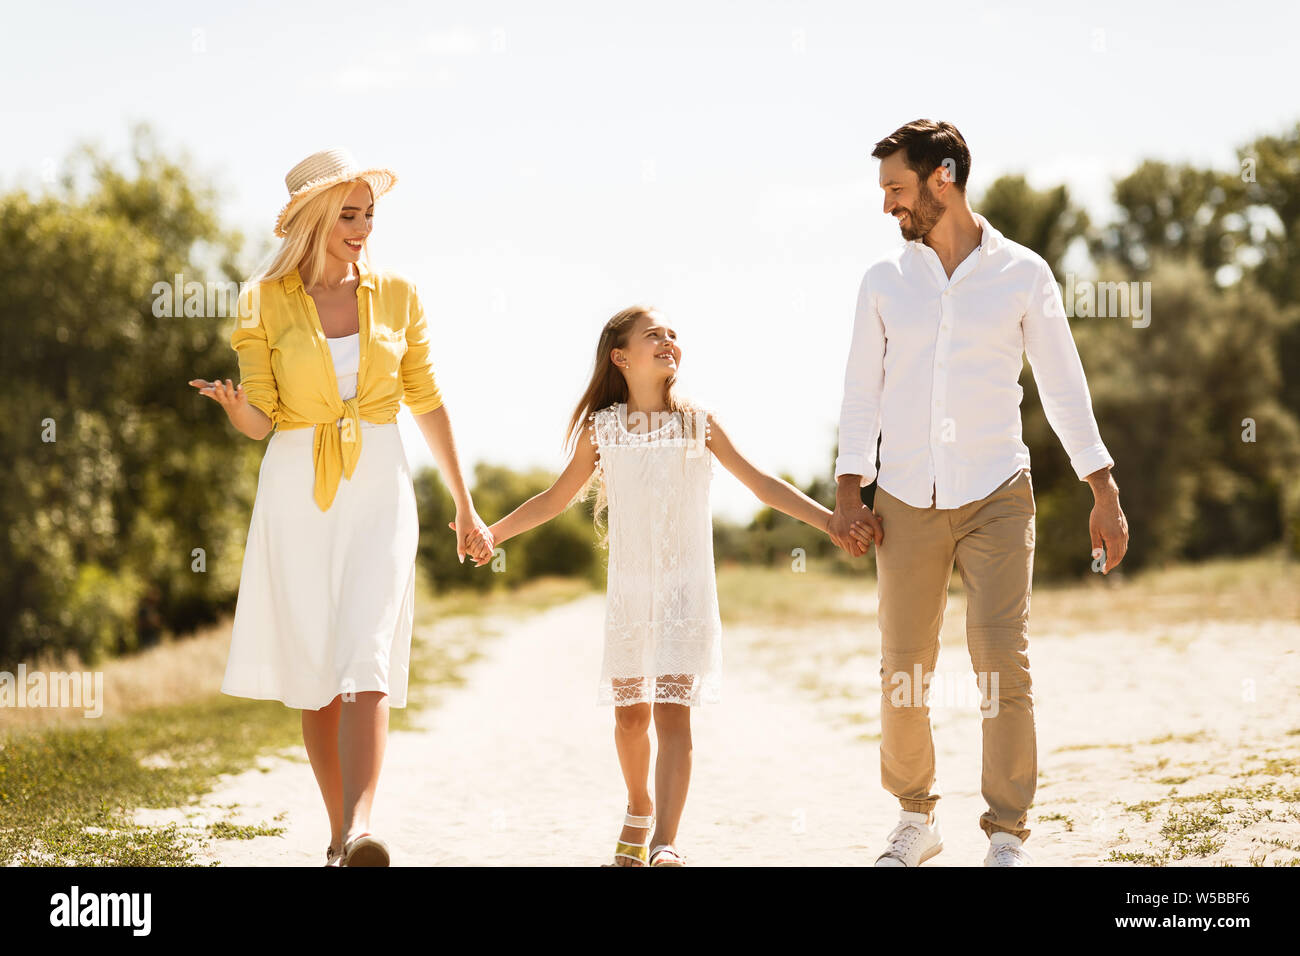 Happy Family walking on path holding hands Banque D'Images